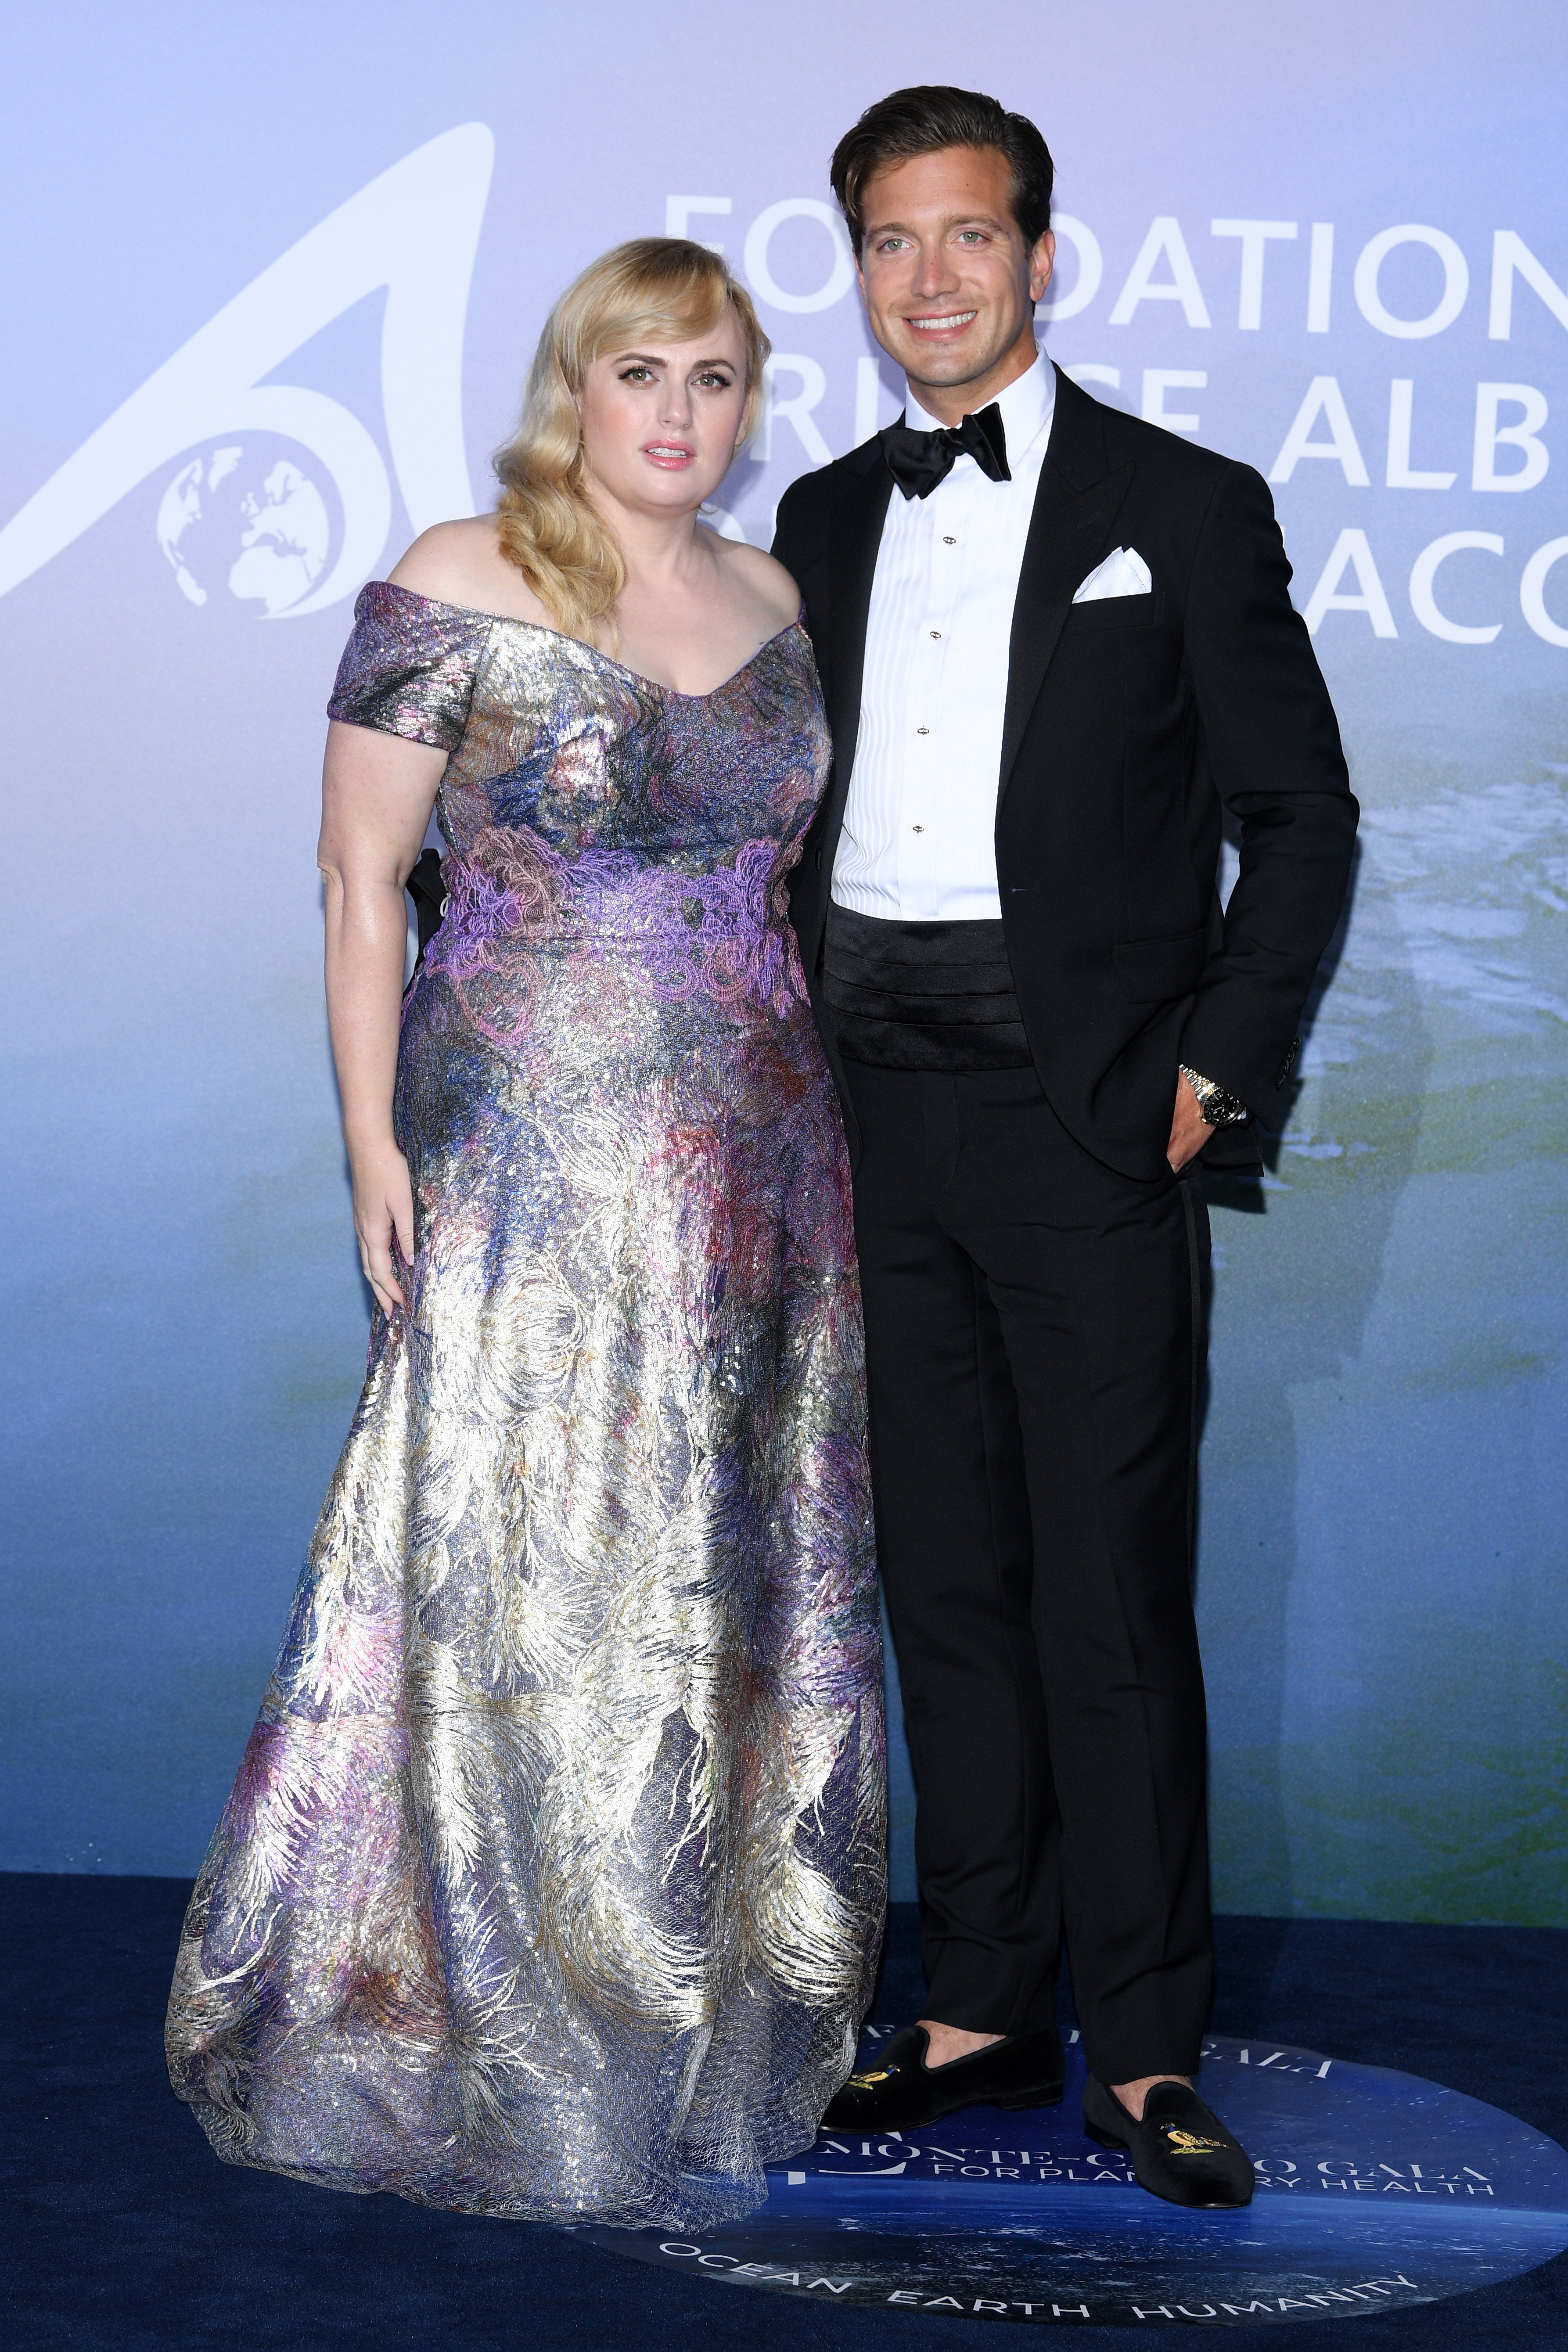 Rebel WIlson and Jacob Busch attend the Monte-Carlo Gala for Planetary Health in Monaco on September 24, 2020 | Photo: Getty Images